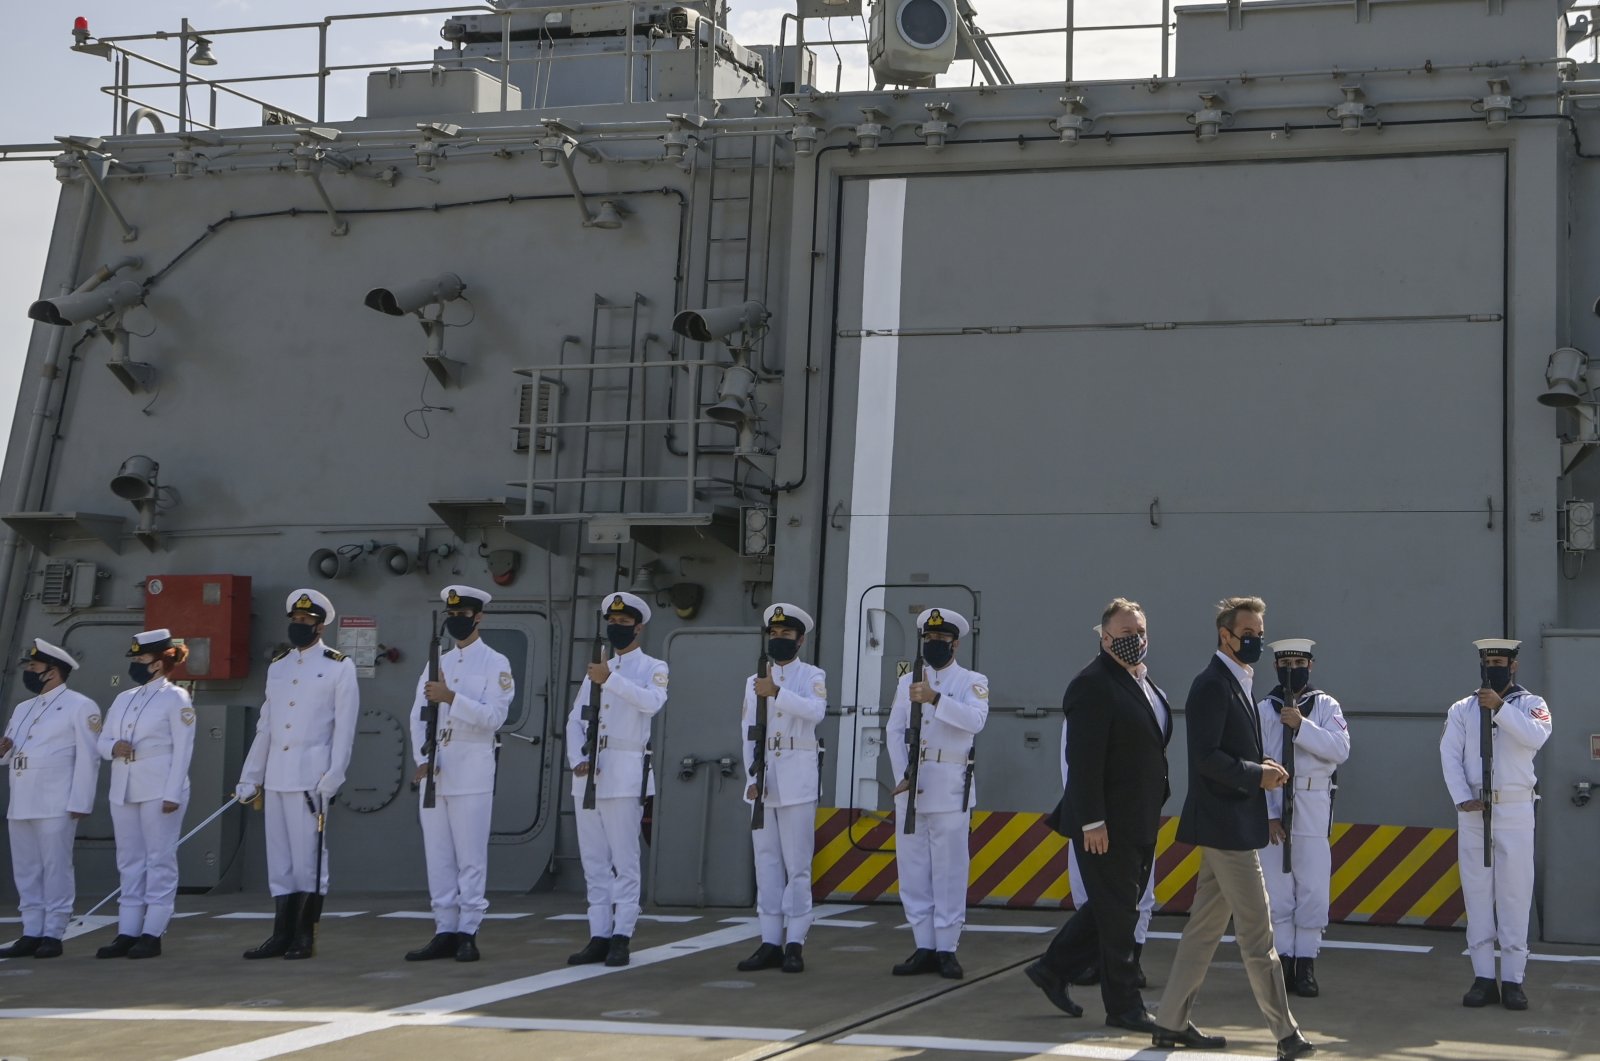 US Secretary of State Mike Pompeo left, and Greek Prime Minister Kyriakos Mitsotakis visit the Greek frigate Salamis at the Naval Support Activity base at Souda, on the Greek island of Crete, Tuesday, Sept. 29, 2020. (AP Photo)